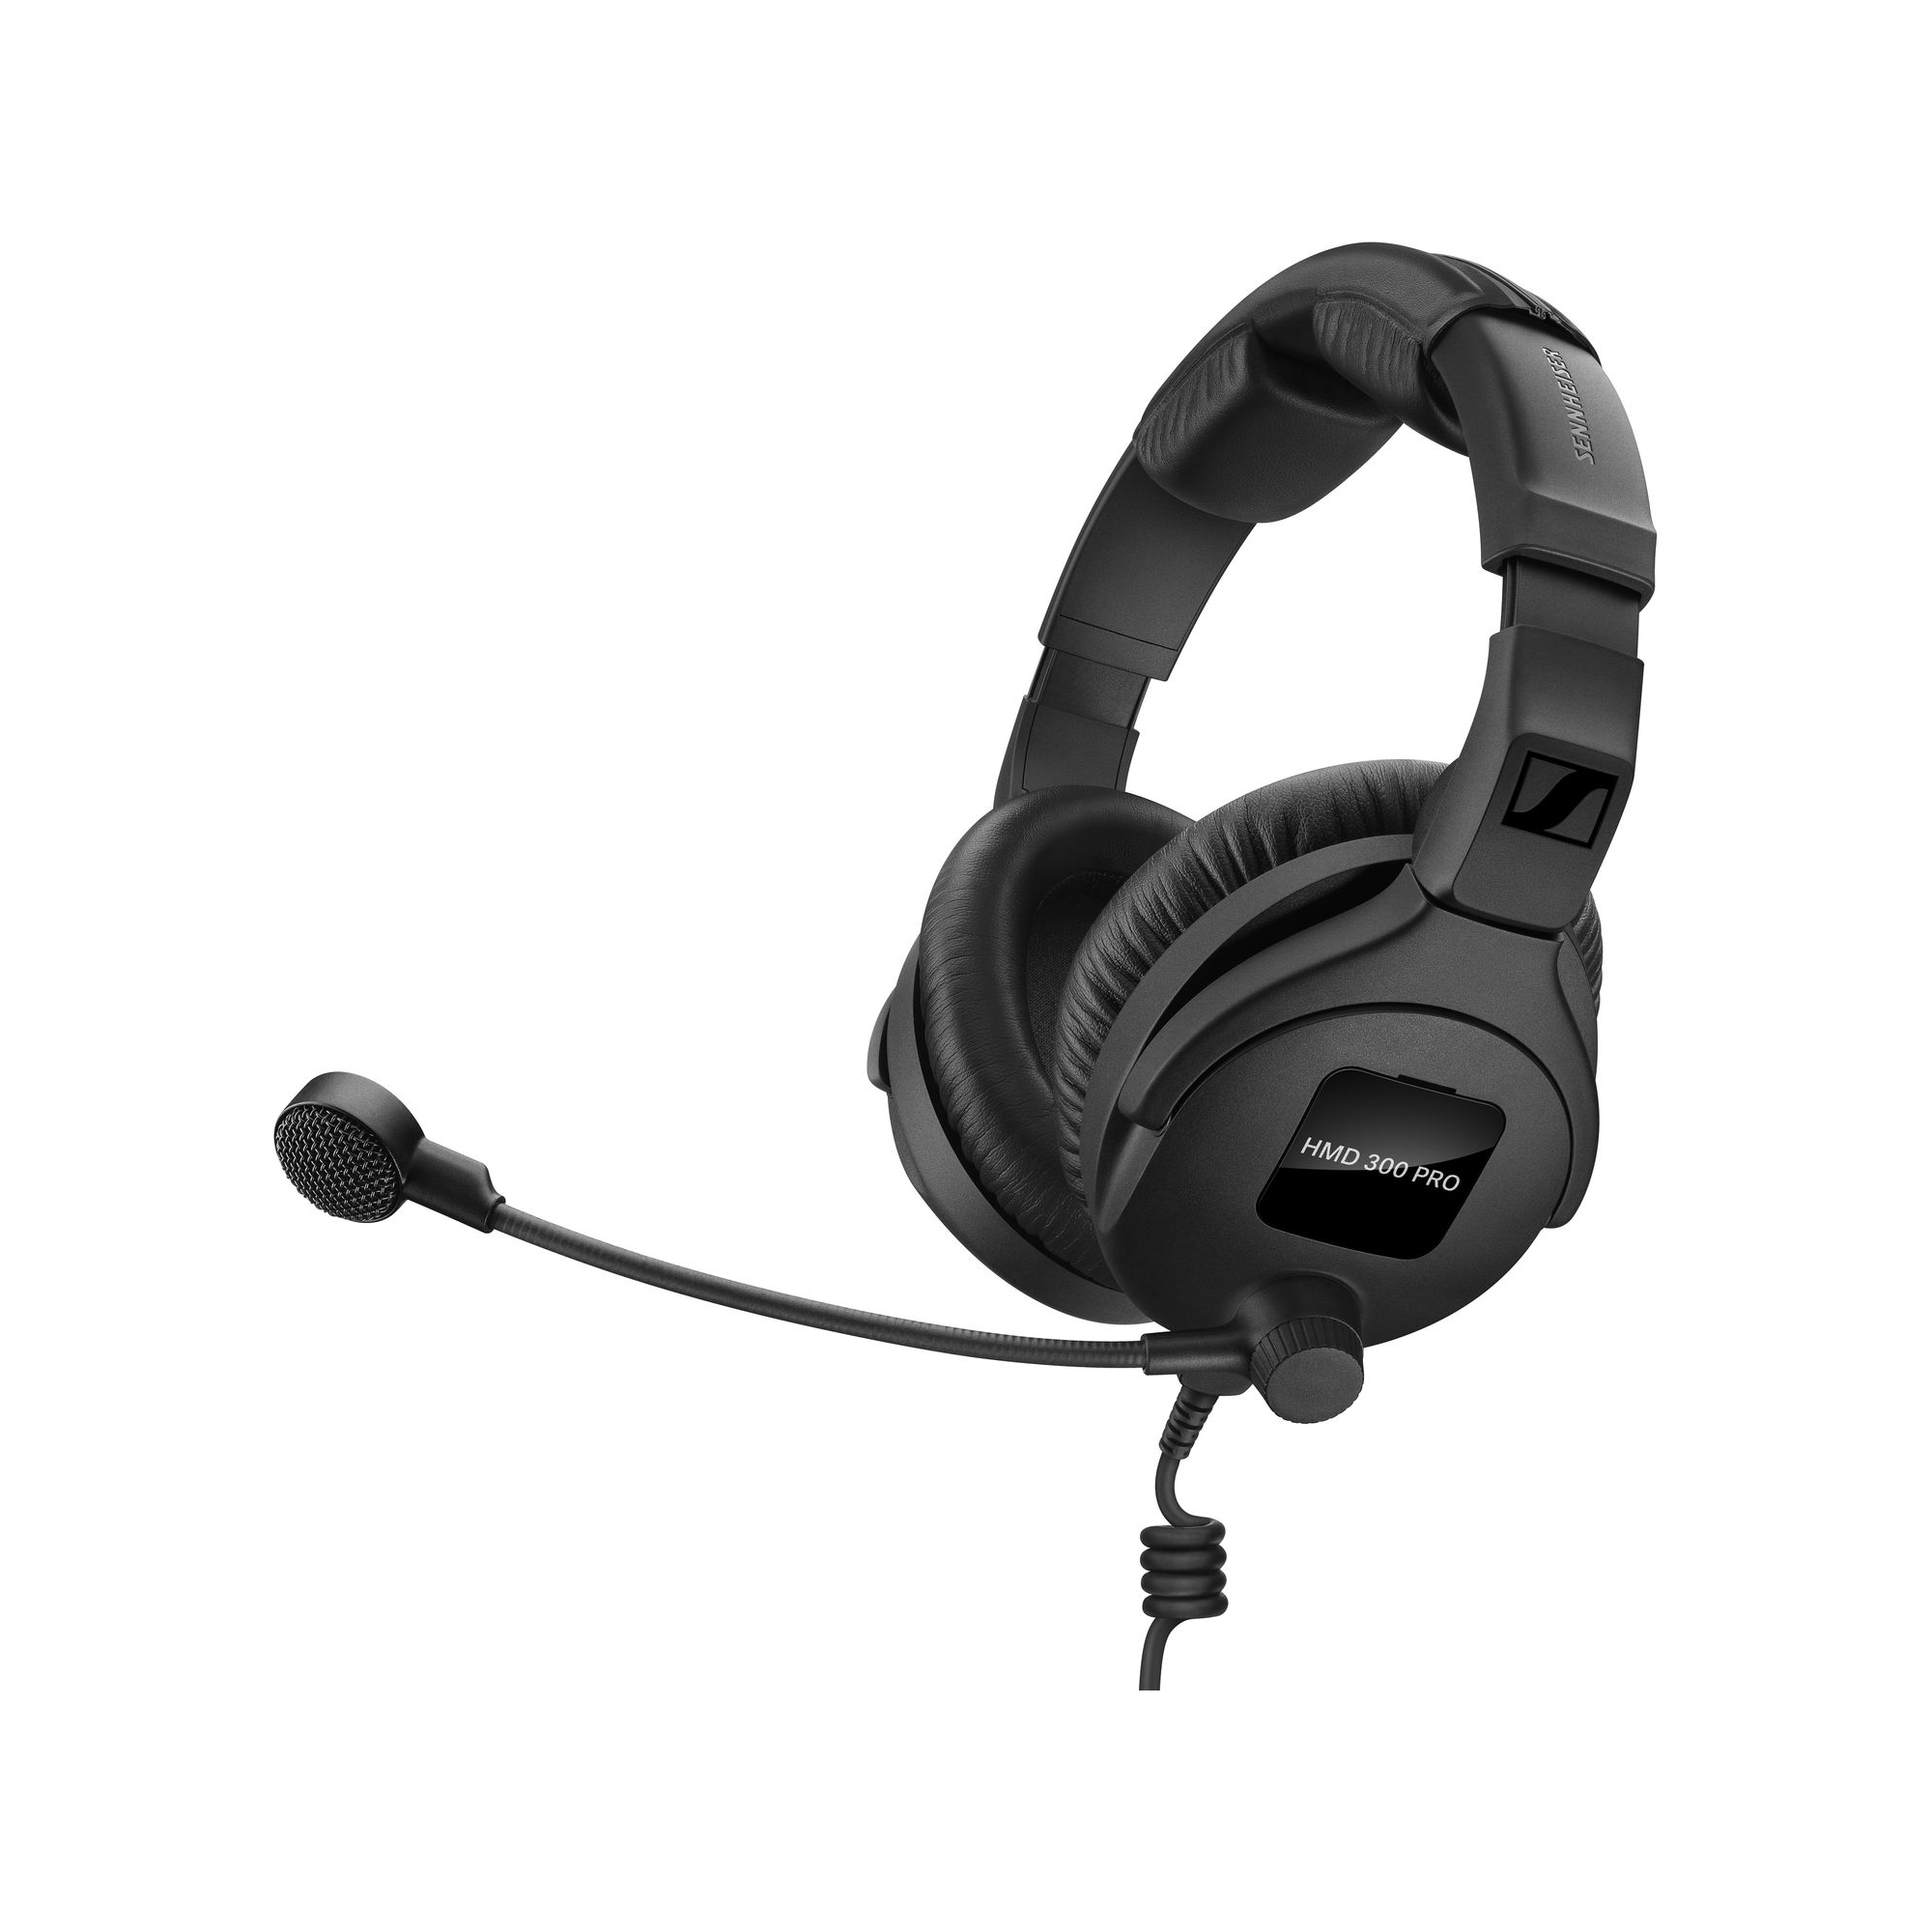 Sennheiser HMD 300 PRO Broadcast Headset Without Cable, Circumaural